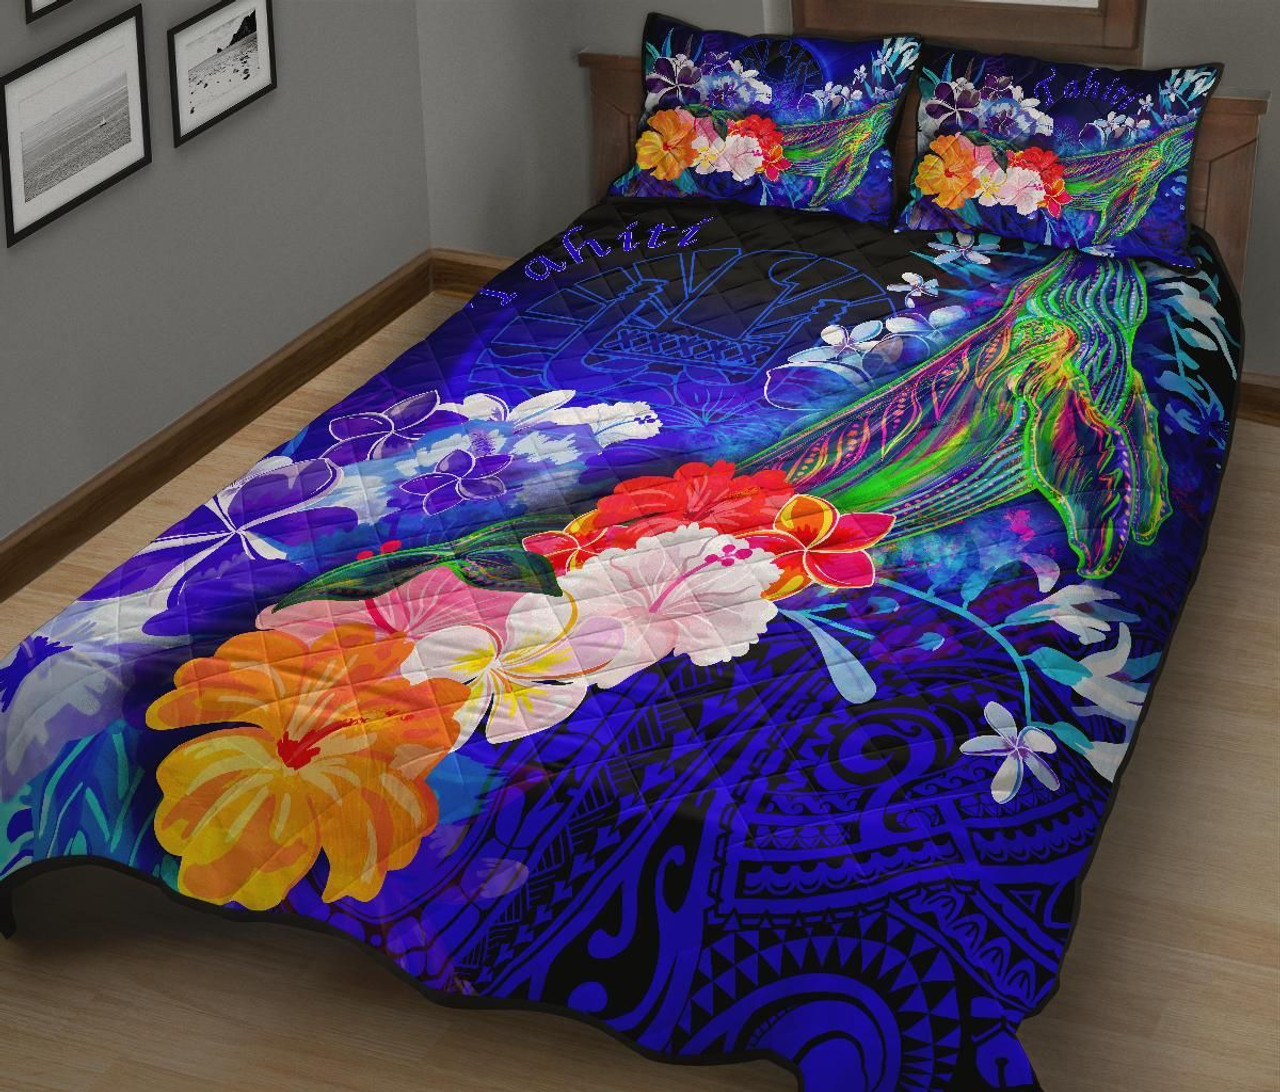 Tahiti Quilt Bed Set - Humpback Whale with Tropical Flowers (Blue) 2